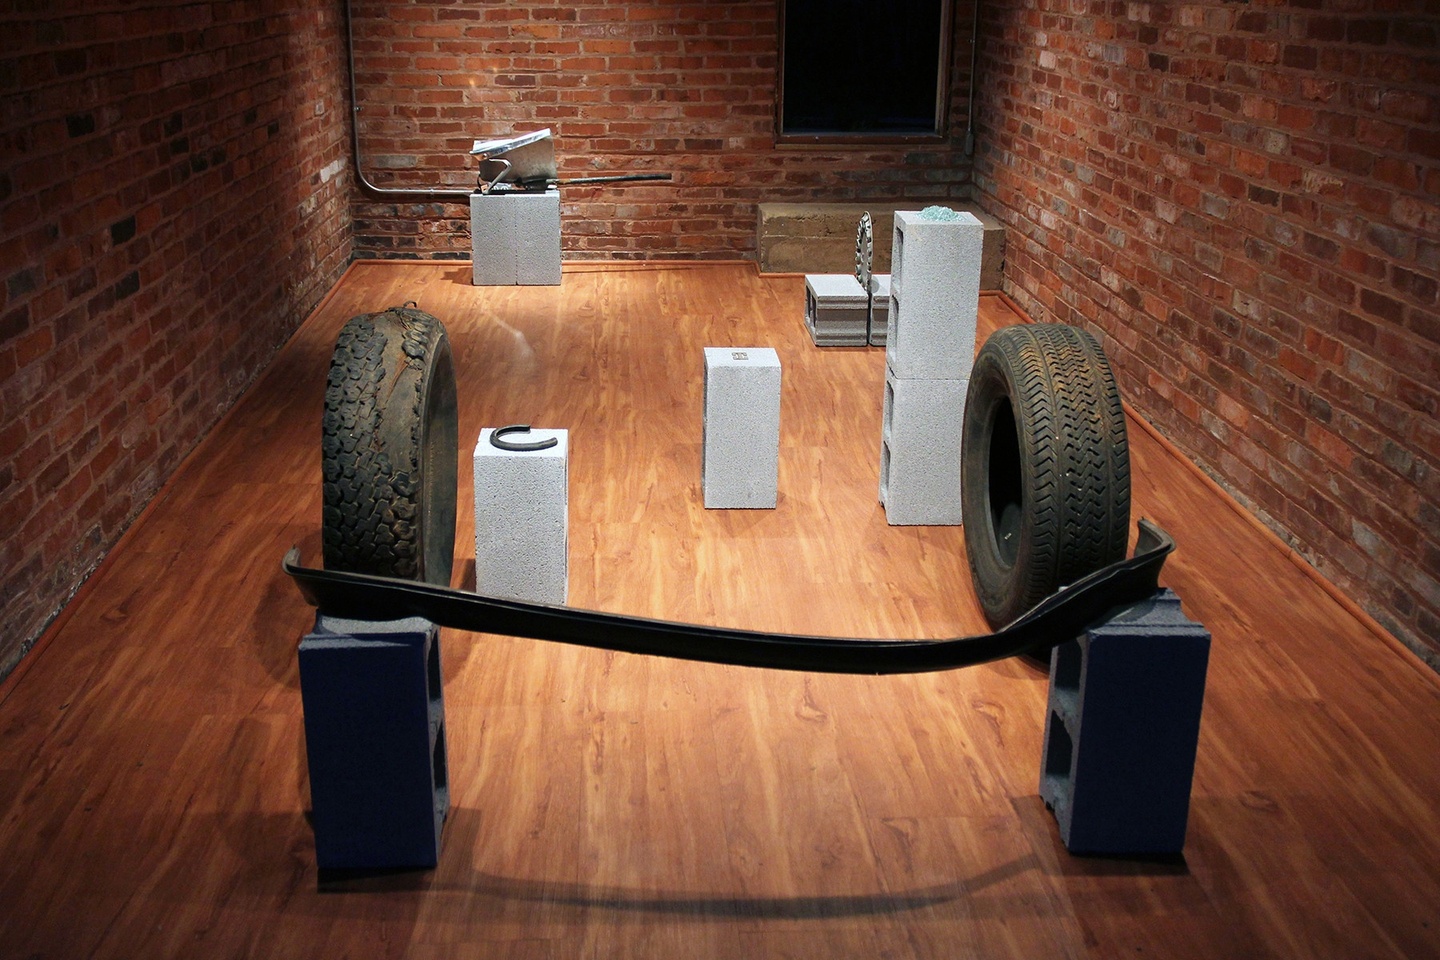 In a gallery space, whose walls are brick with wooden floors, an installation: various car parts placed on cinder blocks, some of which are stacked. Two tires are placed opposite each other, in the midground.